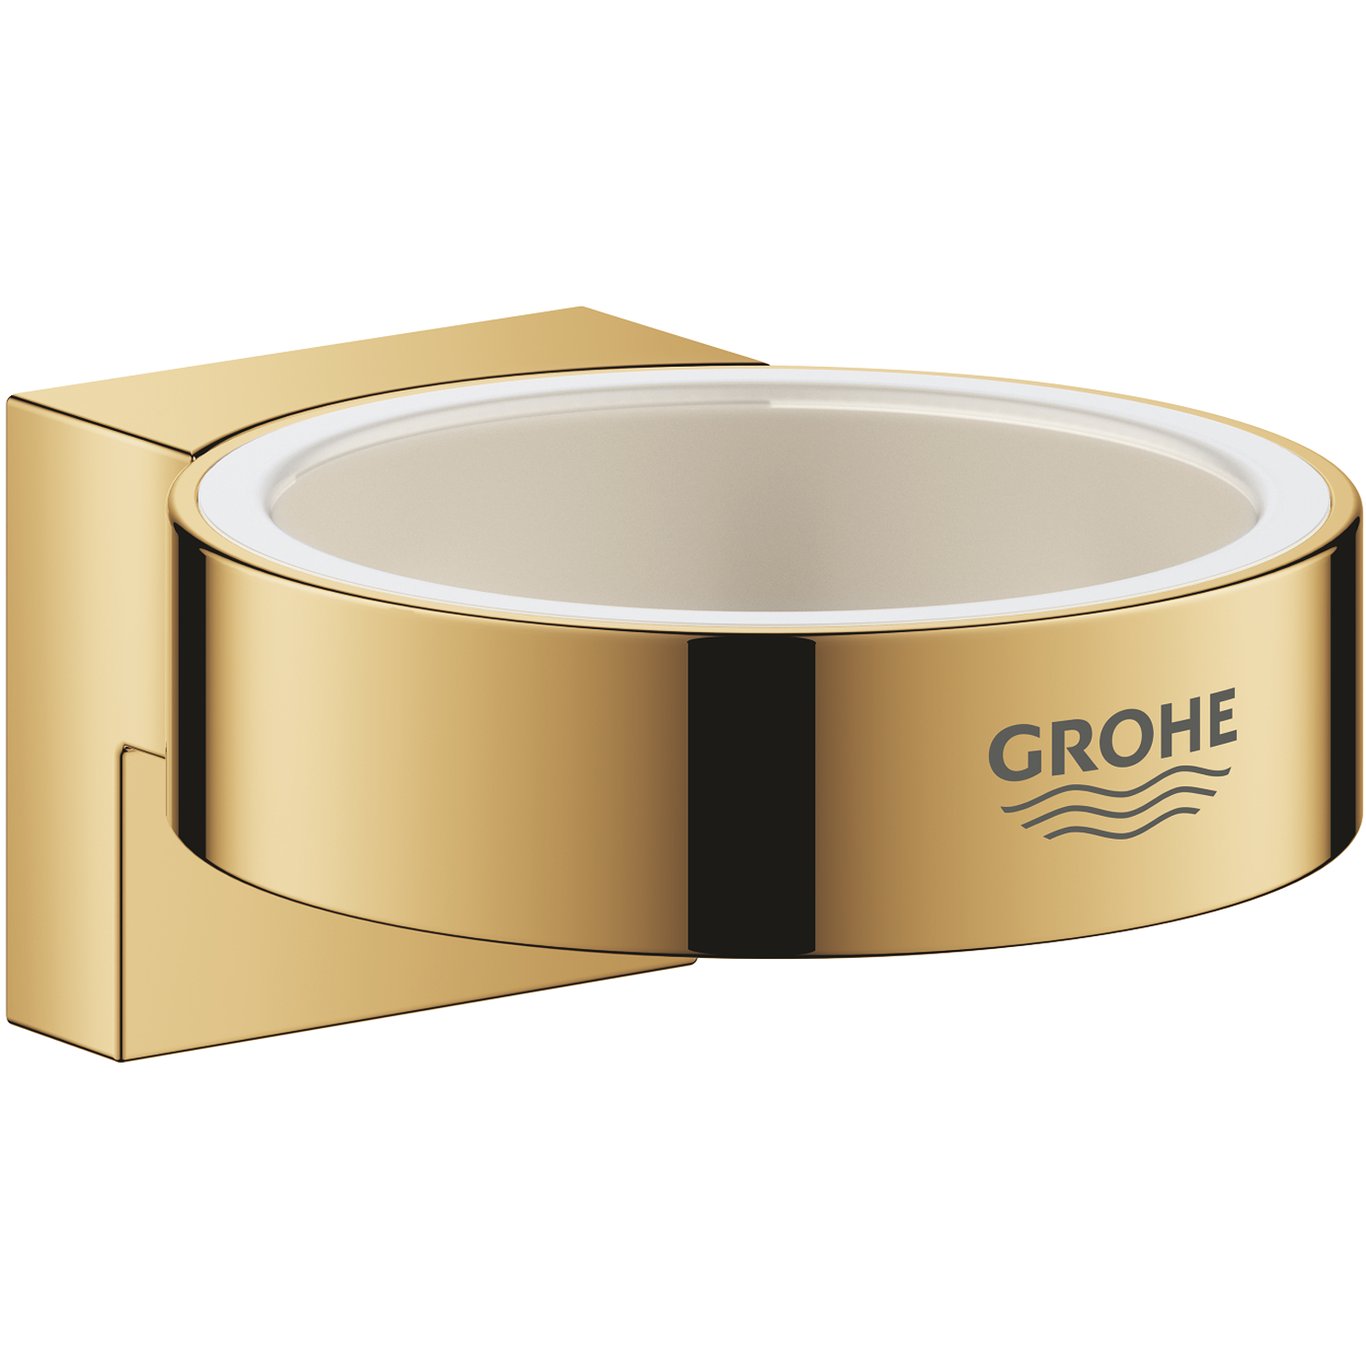 GROHE SELECTION HOLDER COOL SUNRISE